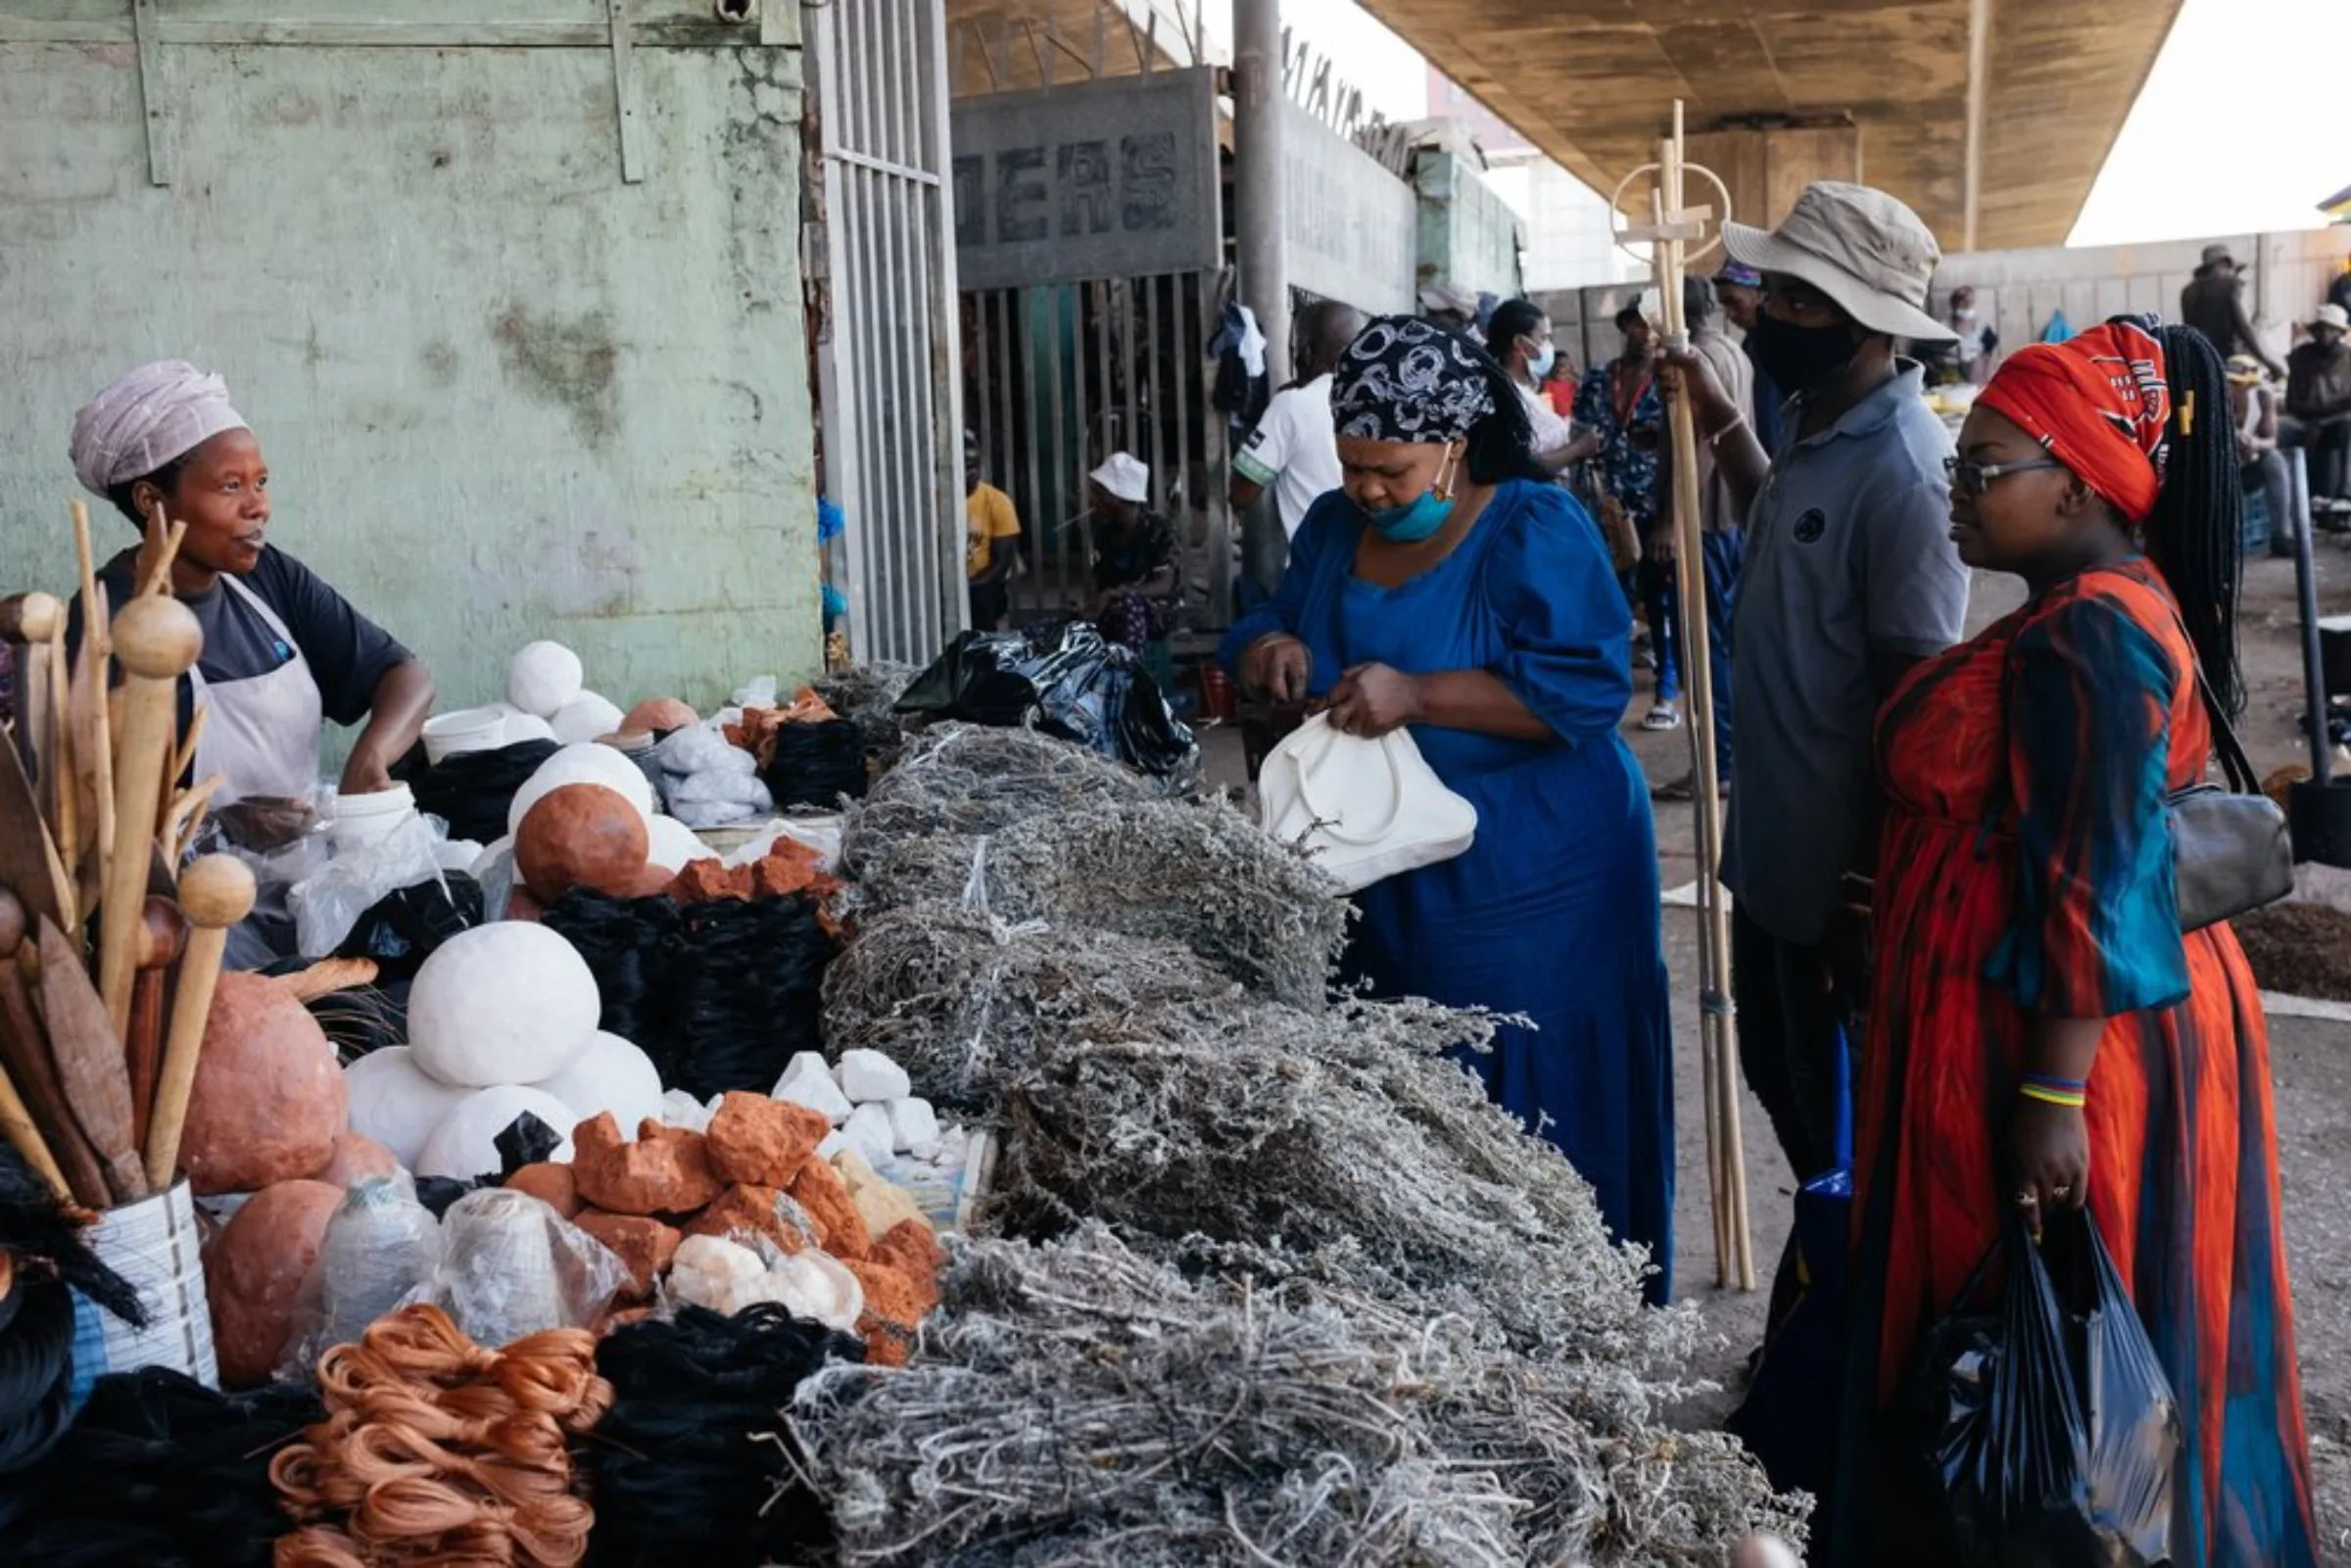 Potential buyers look at the wares at Warwick Market in inner-city Durban, March 31, 2021. Informal traders at the busy market offer everything from fresh produce and traditional medicine to clothes and music